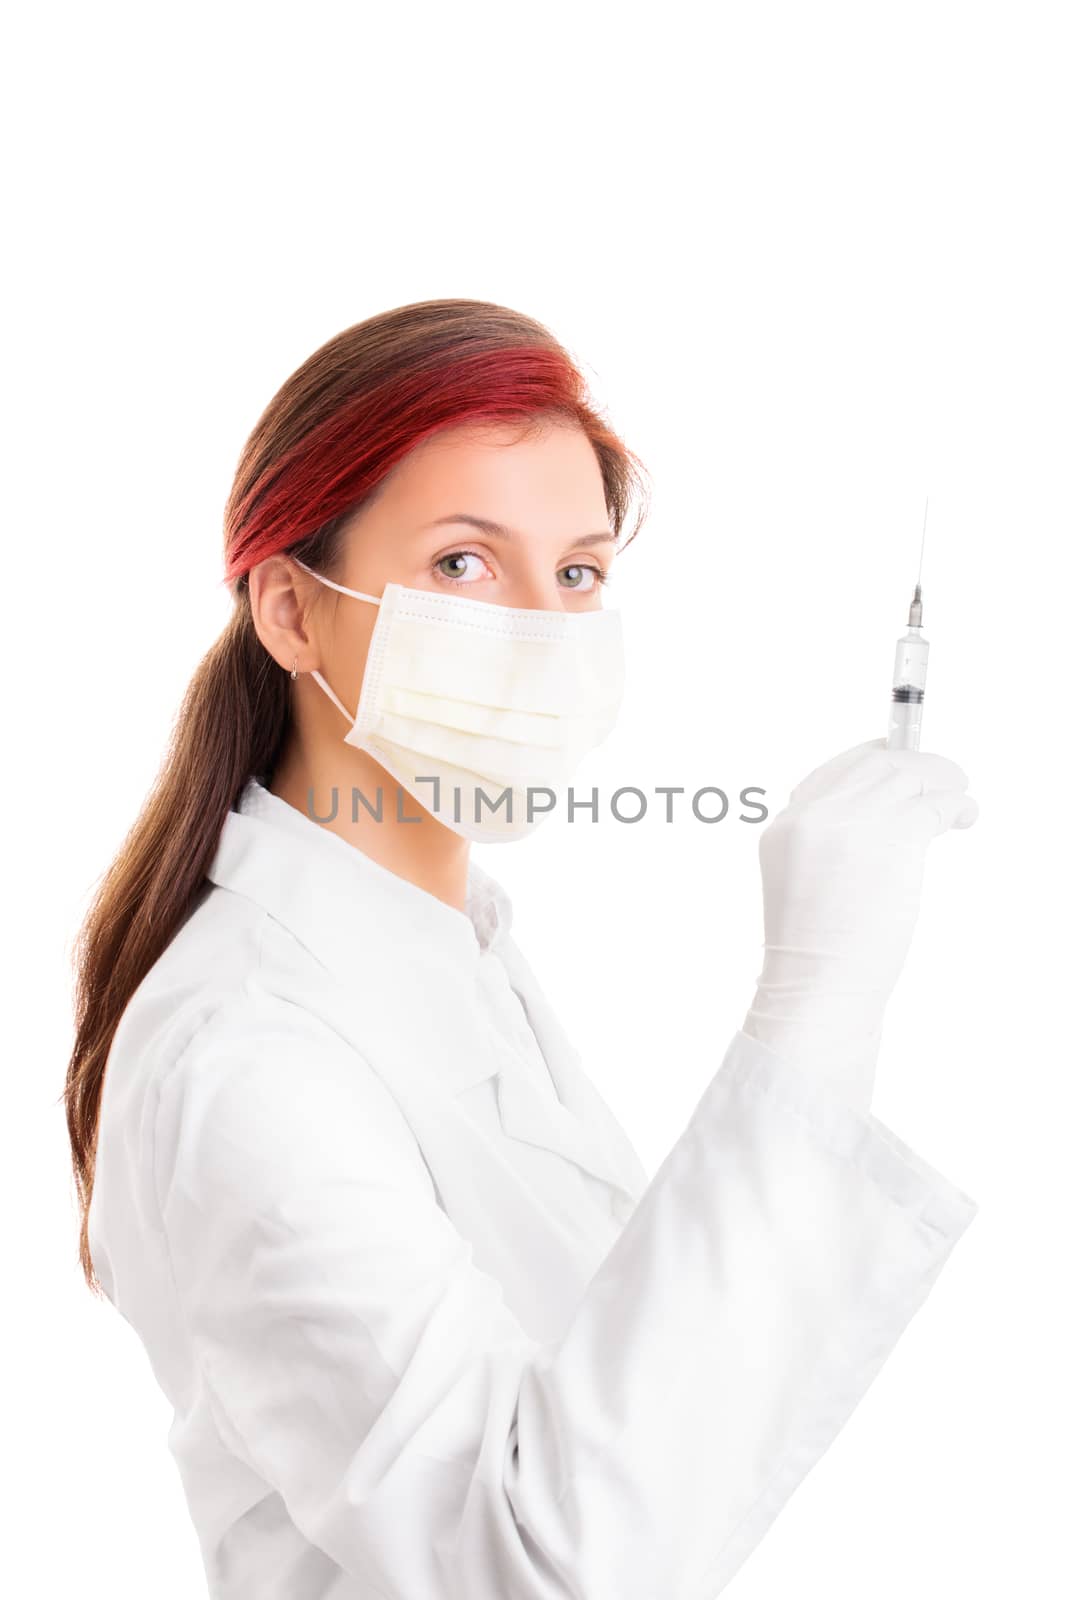 Beautiful young female doctor with protective surgical mask, holding a syringe with a needle, isolated on white background. Healthcare and vaccination concept.